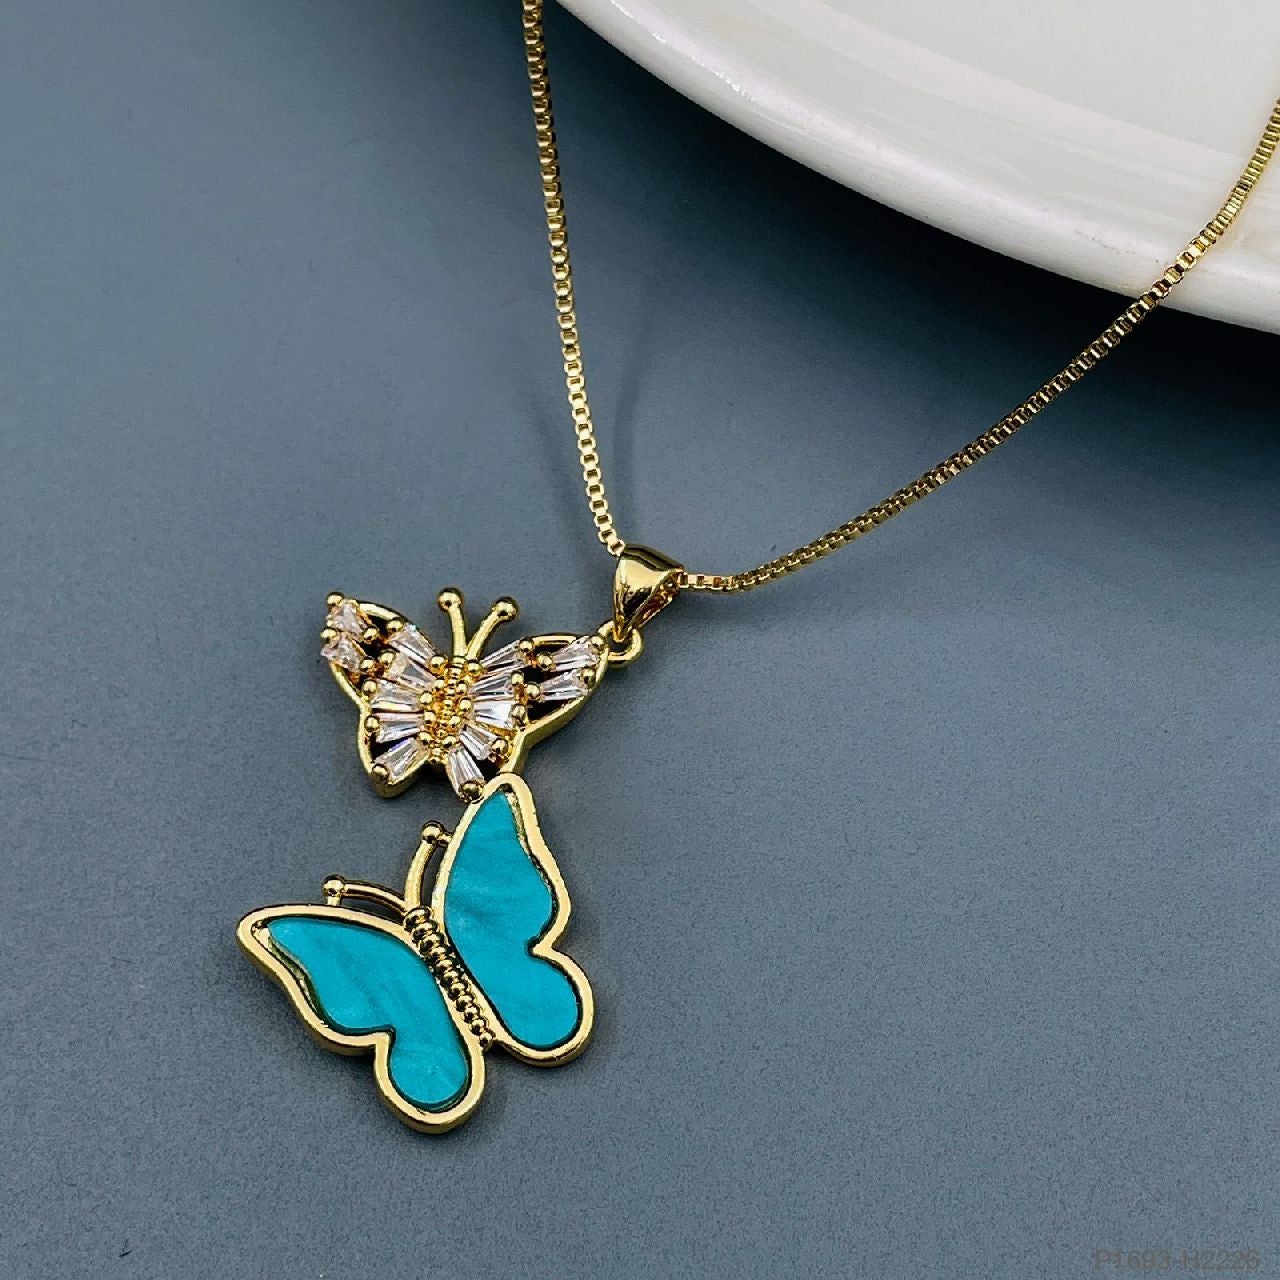 Brass Crystals Blue Gold Dual Butterfly Necklace Pendant Chain For Women Girls